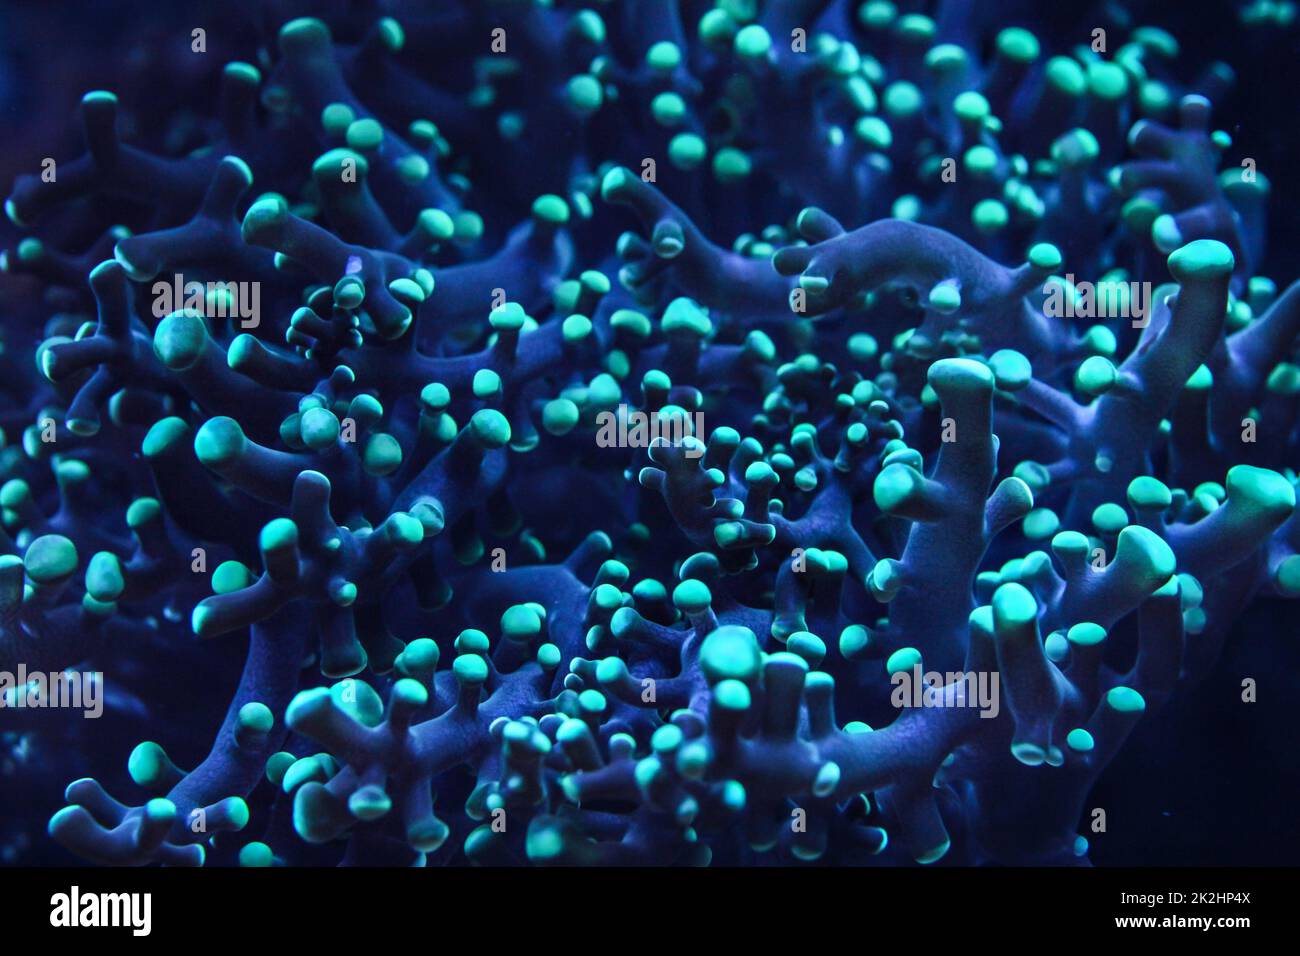 Underwater photo, close up of blue coral emiting fluorescent light in dark. Abstract marine background. Stock Photo